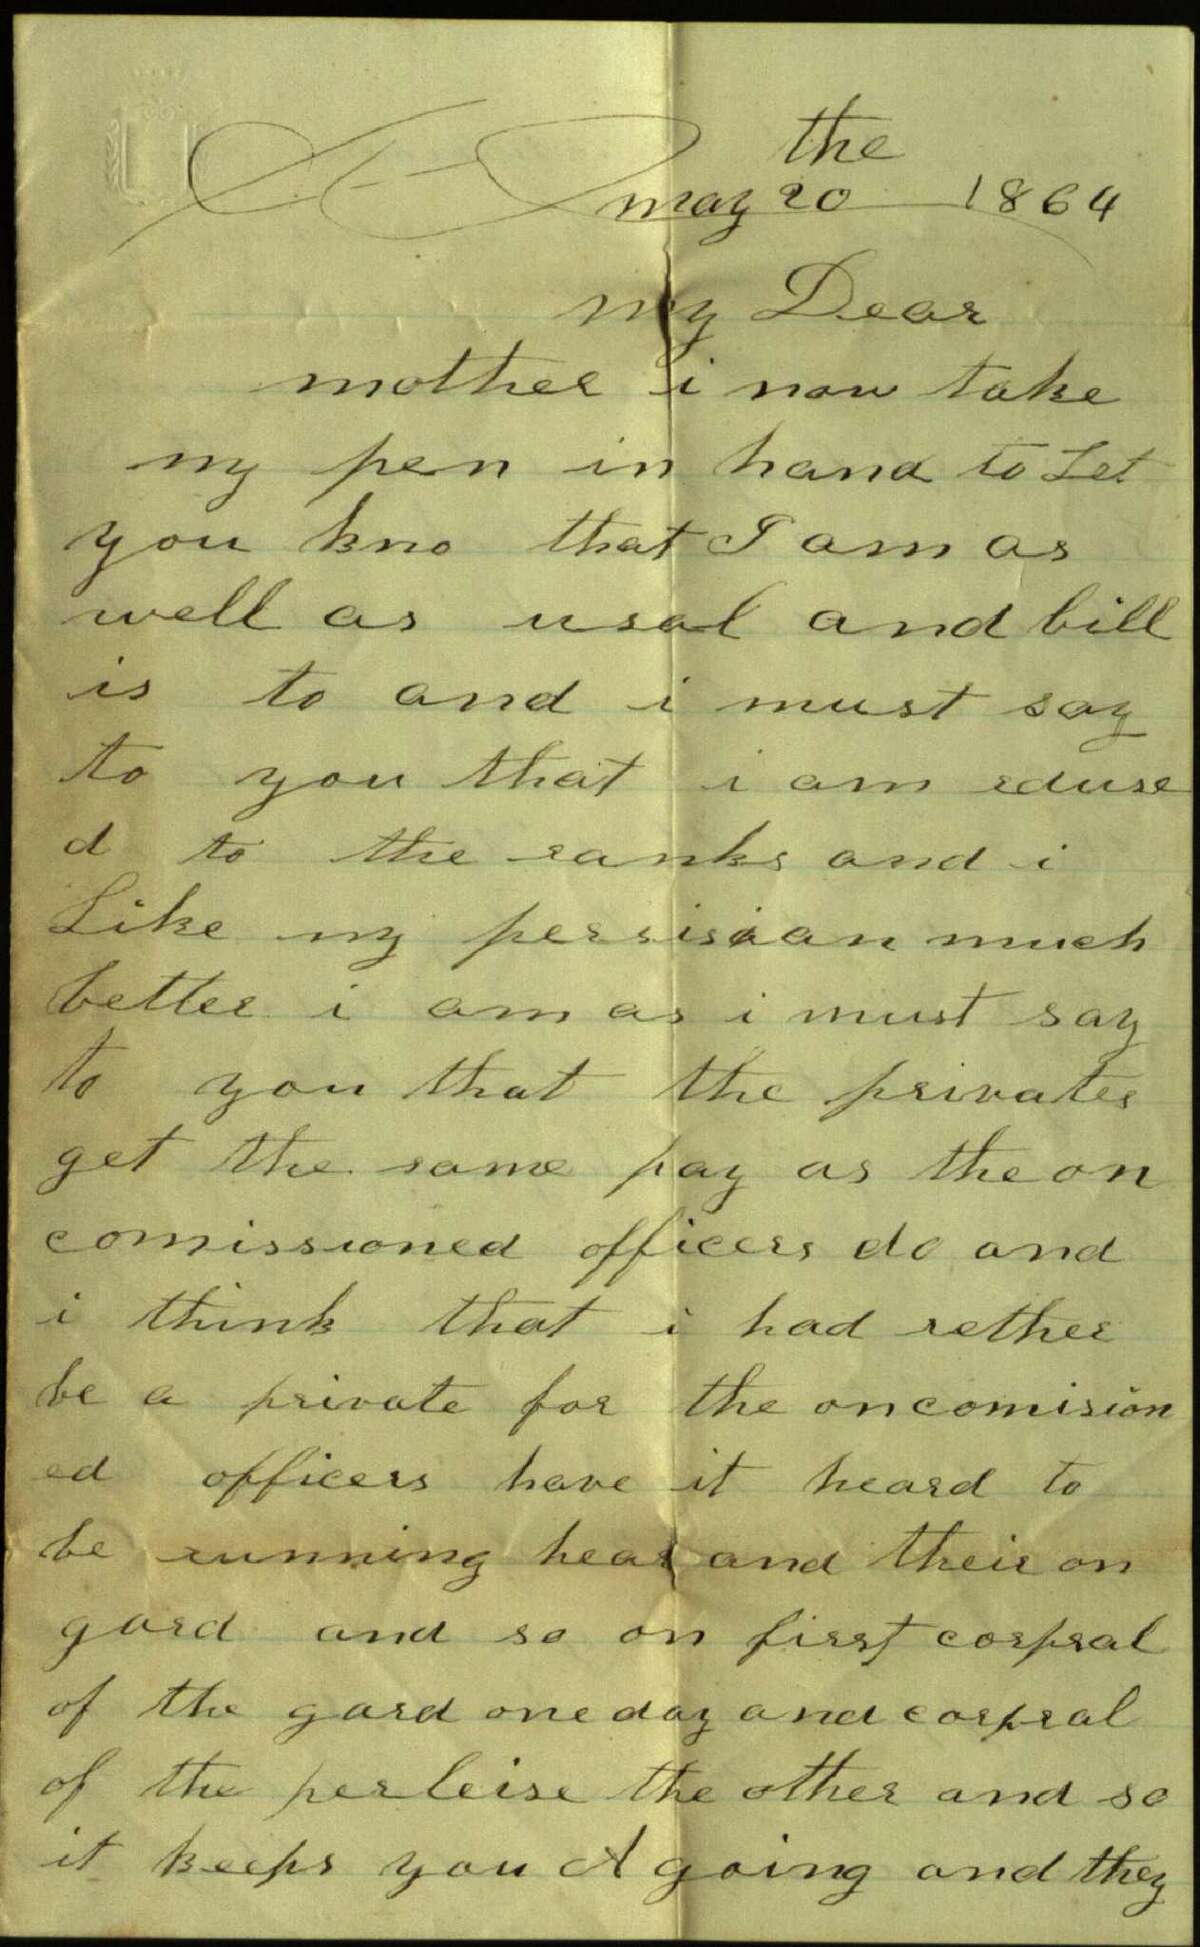 Civil War soldier and Winchester resident Lewis Hazzard wrote this letter to his mother, Louisa, during his service to the Union Army in 1864.